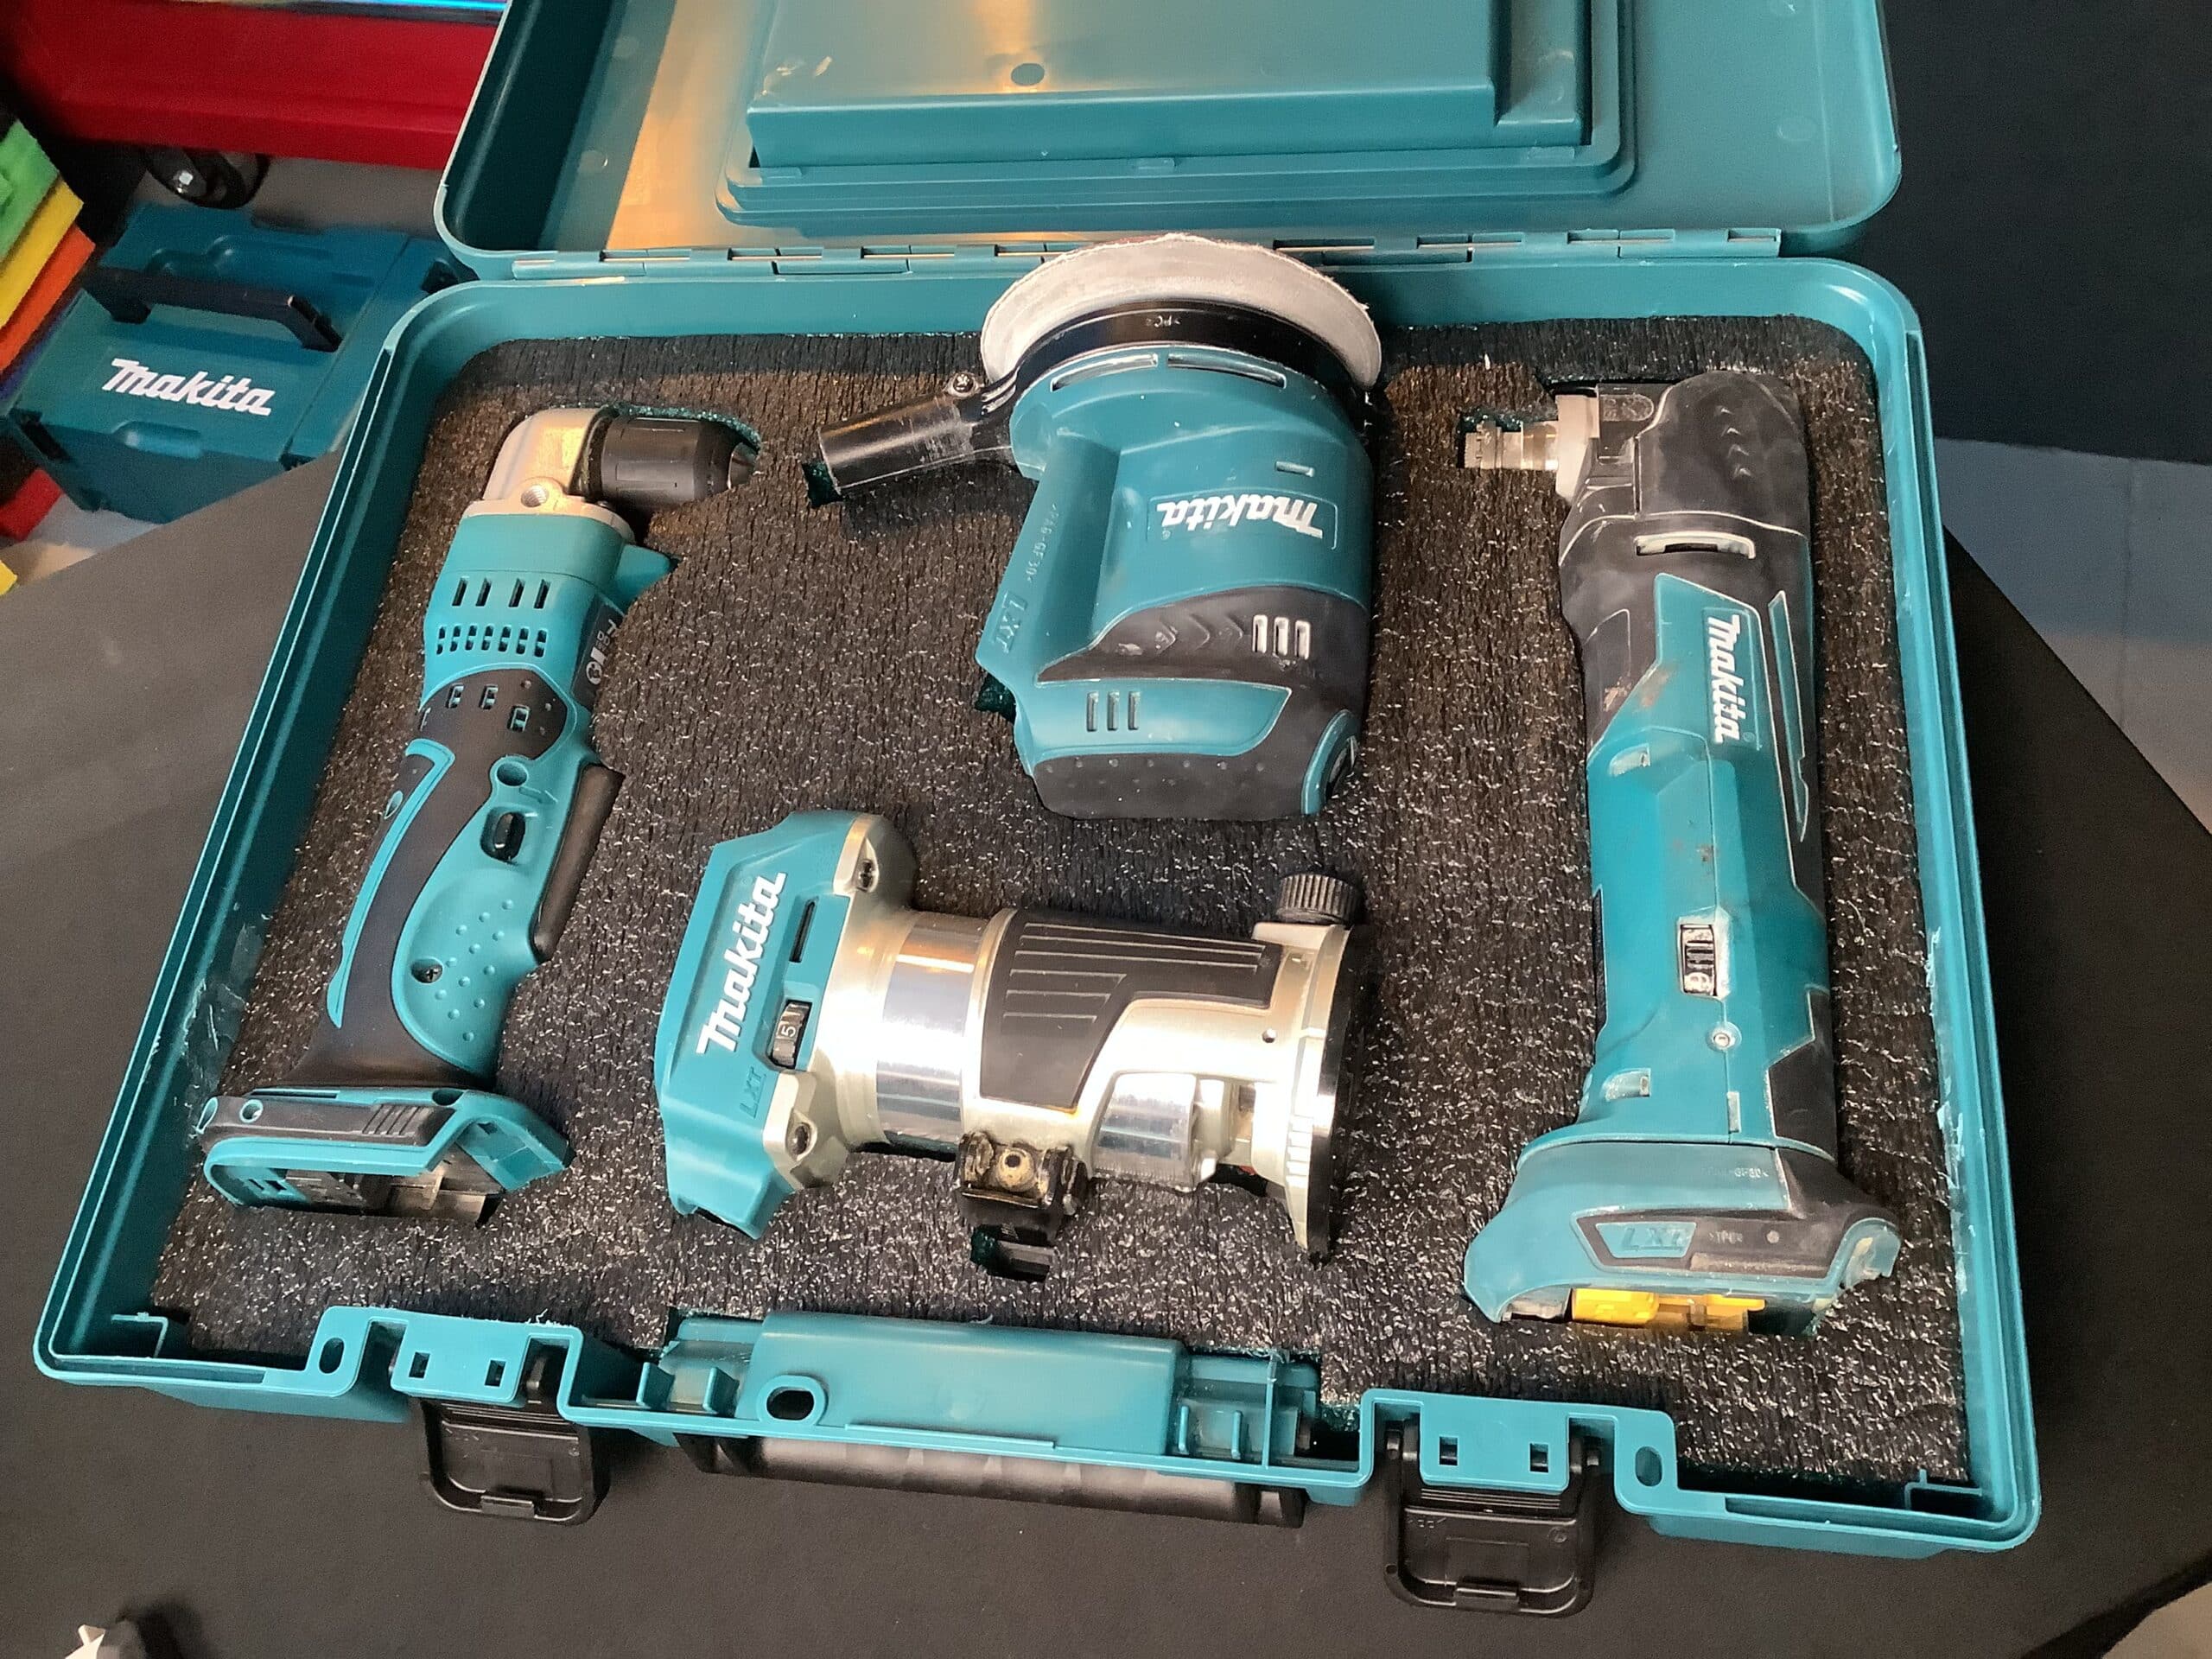 the teal Makita briefcase tool container has been adapted to house a custom made foam insert into which our power tools can be fit for safe storage